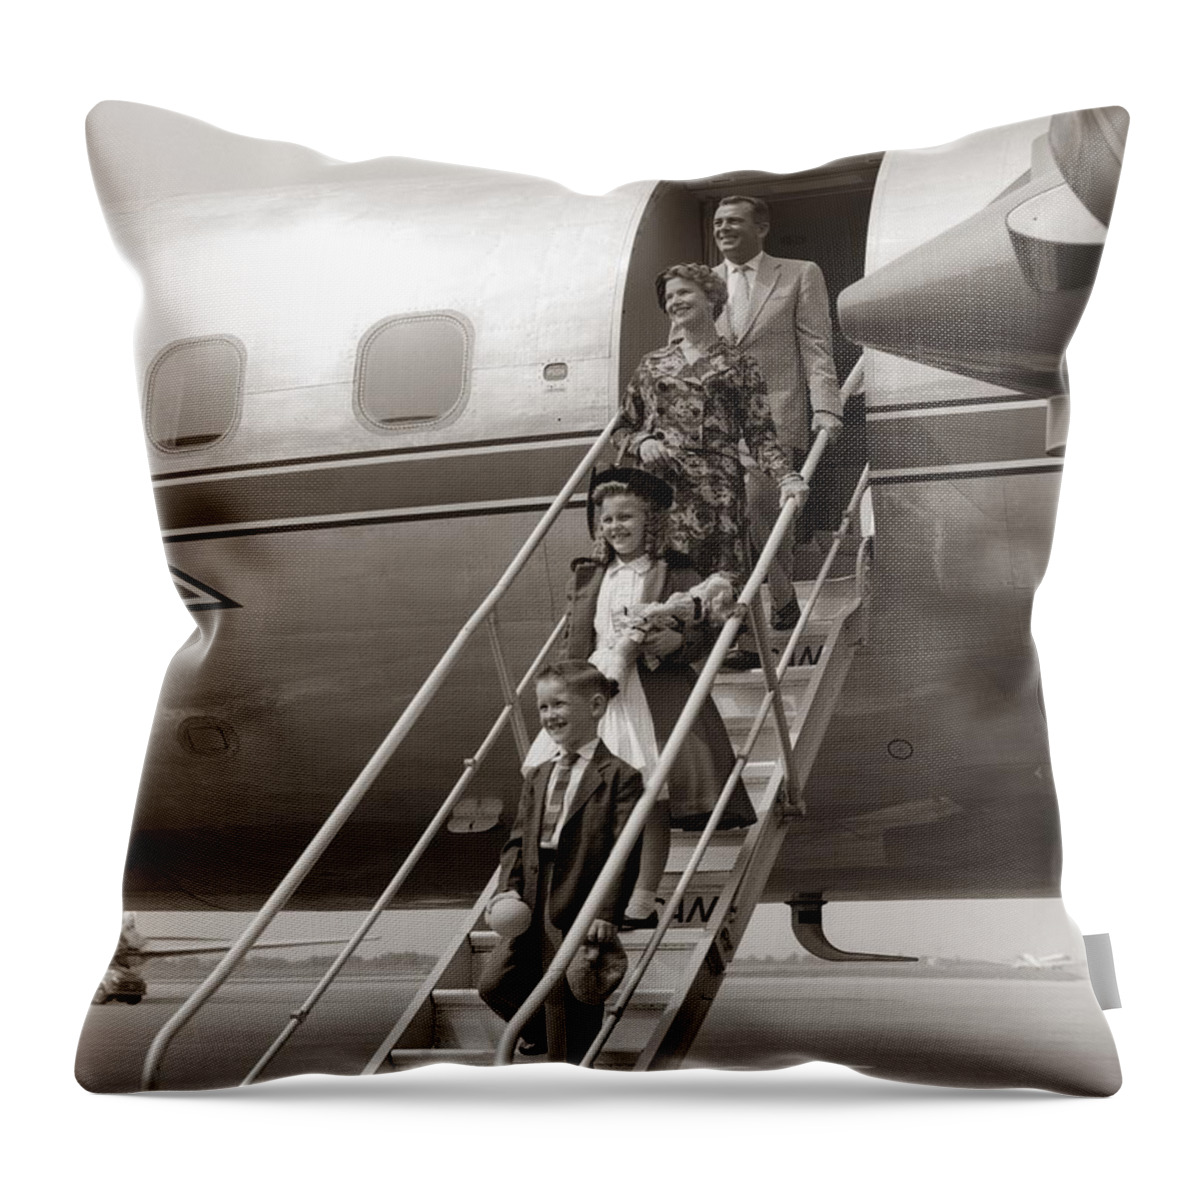 Steps Throw Pillow featuring the photograph Family Walking Down Airplane Stairs by H. Armstrong Roberts